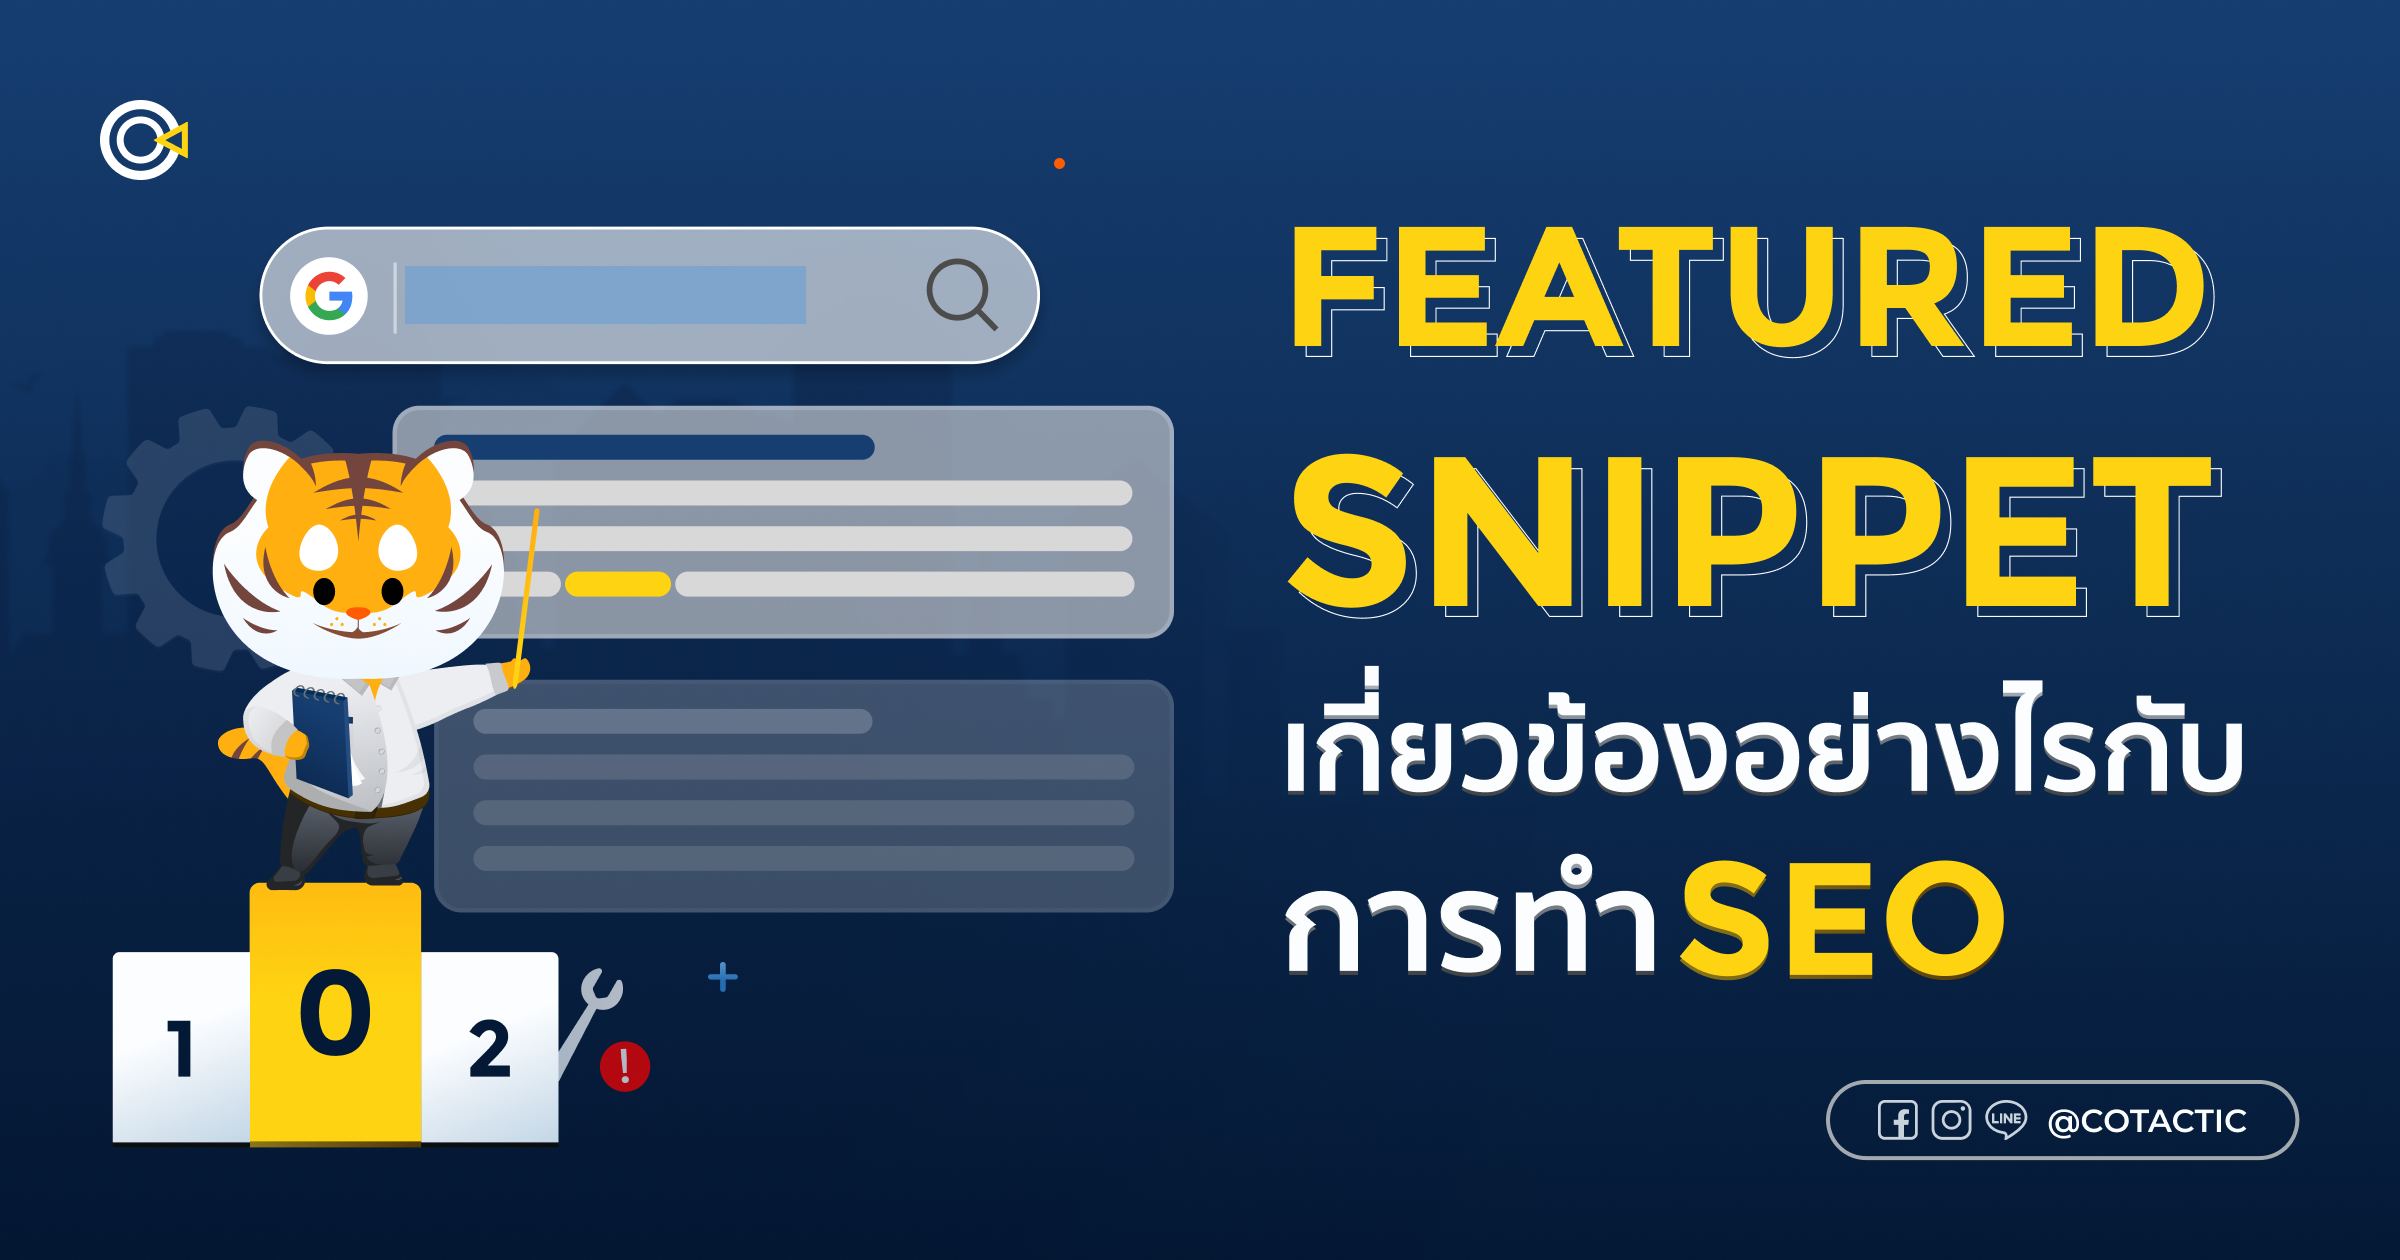 Featured snippet คืออะไร?